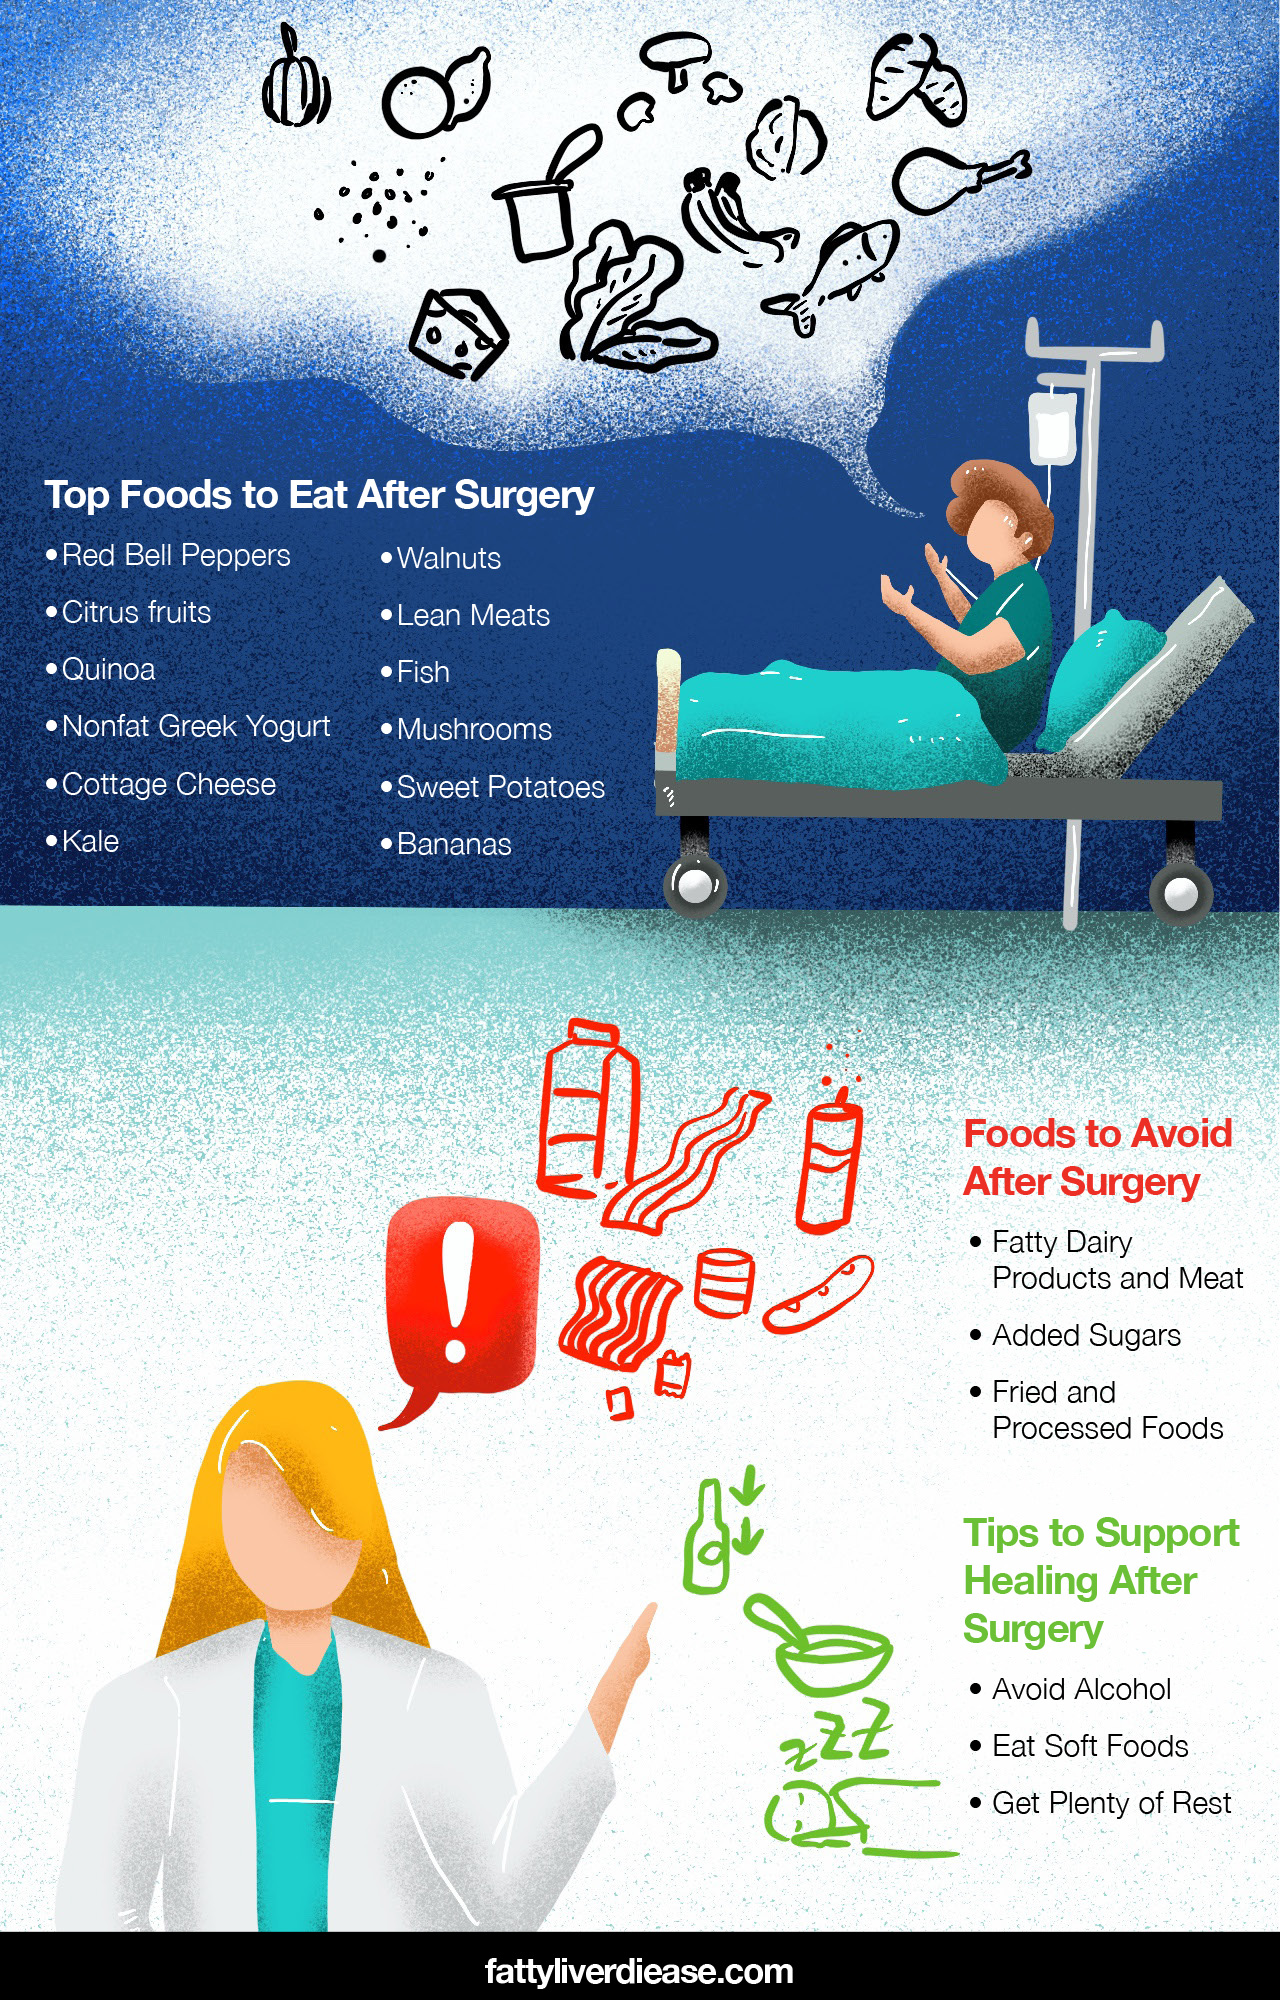 Top Foods to Eat After Surgery